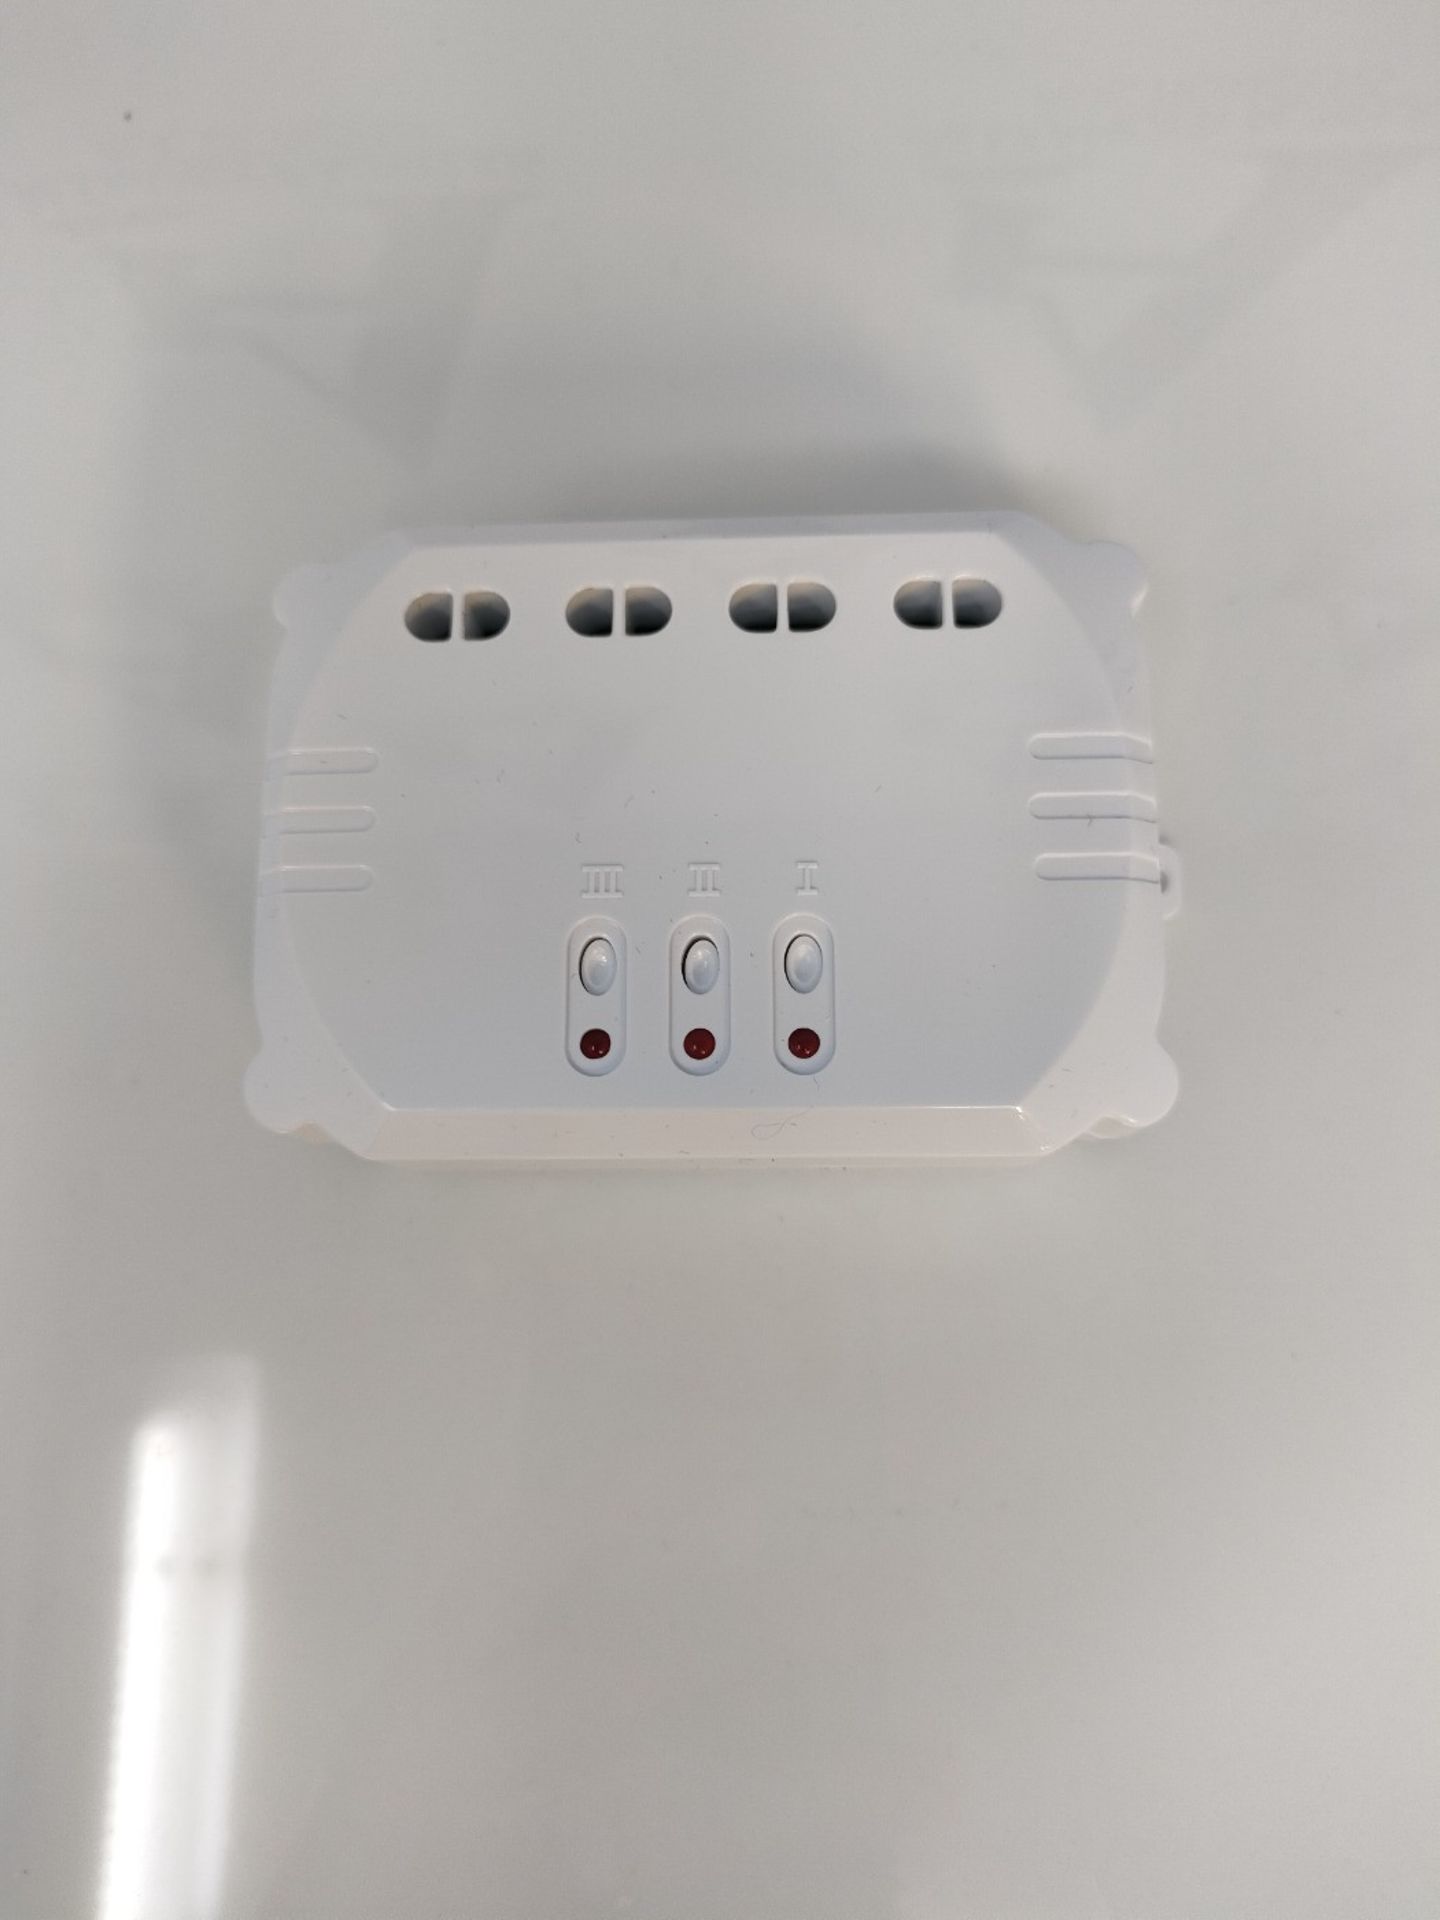 Trust 71053 Smart Home 433 MHz wireless 3-in-1 built-in switch total power ACM-3500-3 - Image 3 of 3